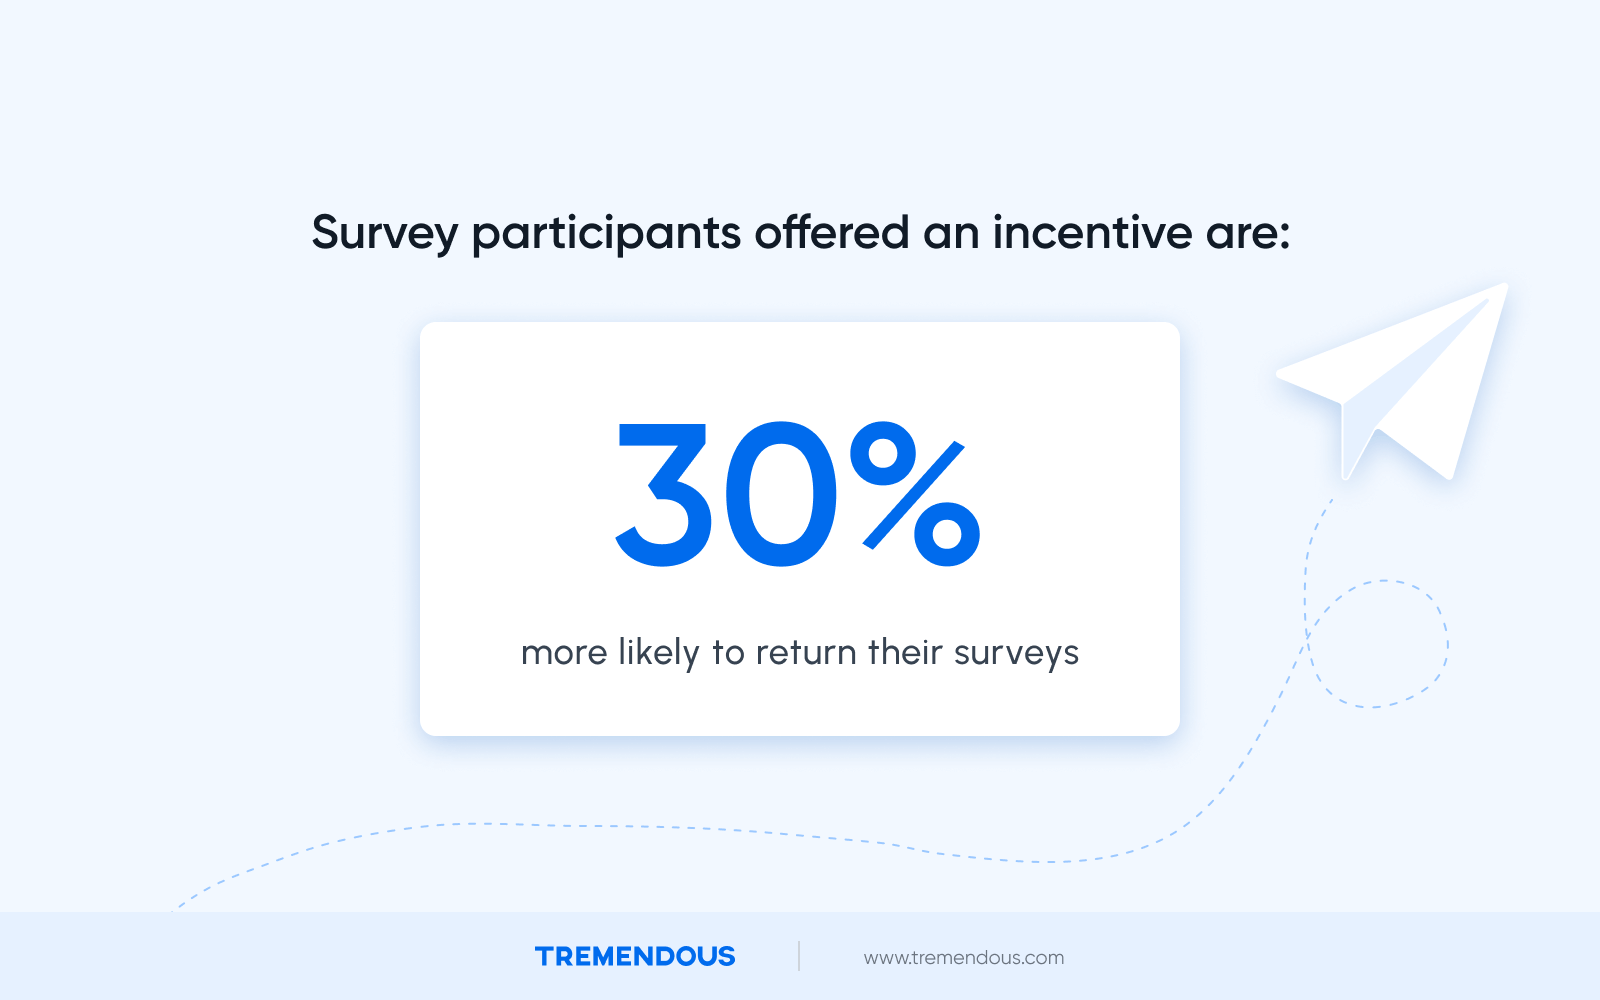 Text reads: "Survey participants offered an incentive are 30% more likely to return their surveys."